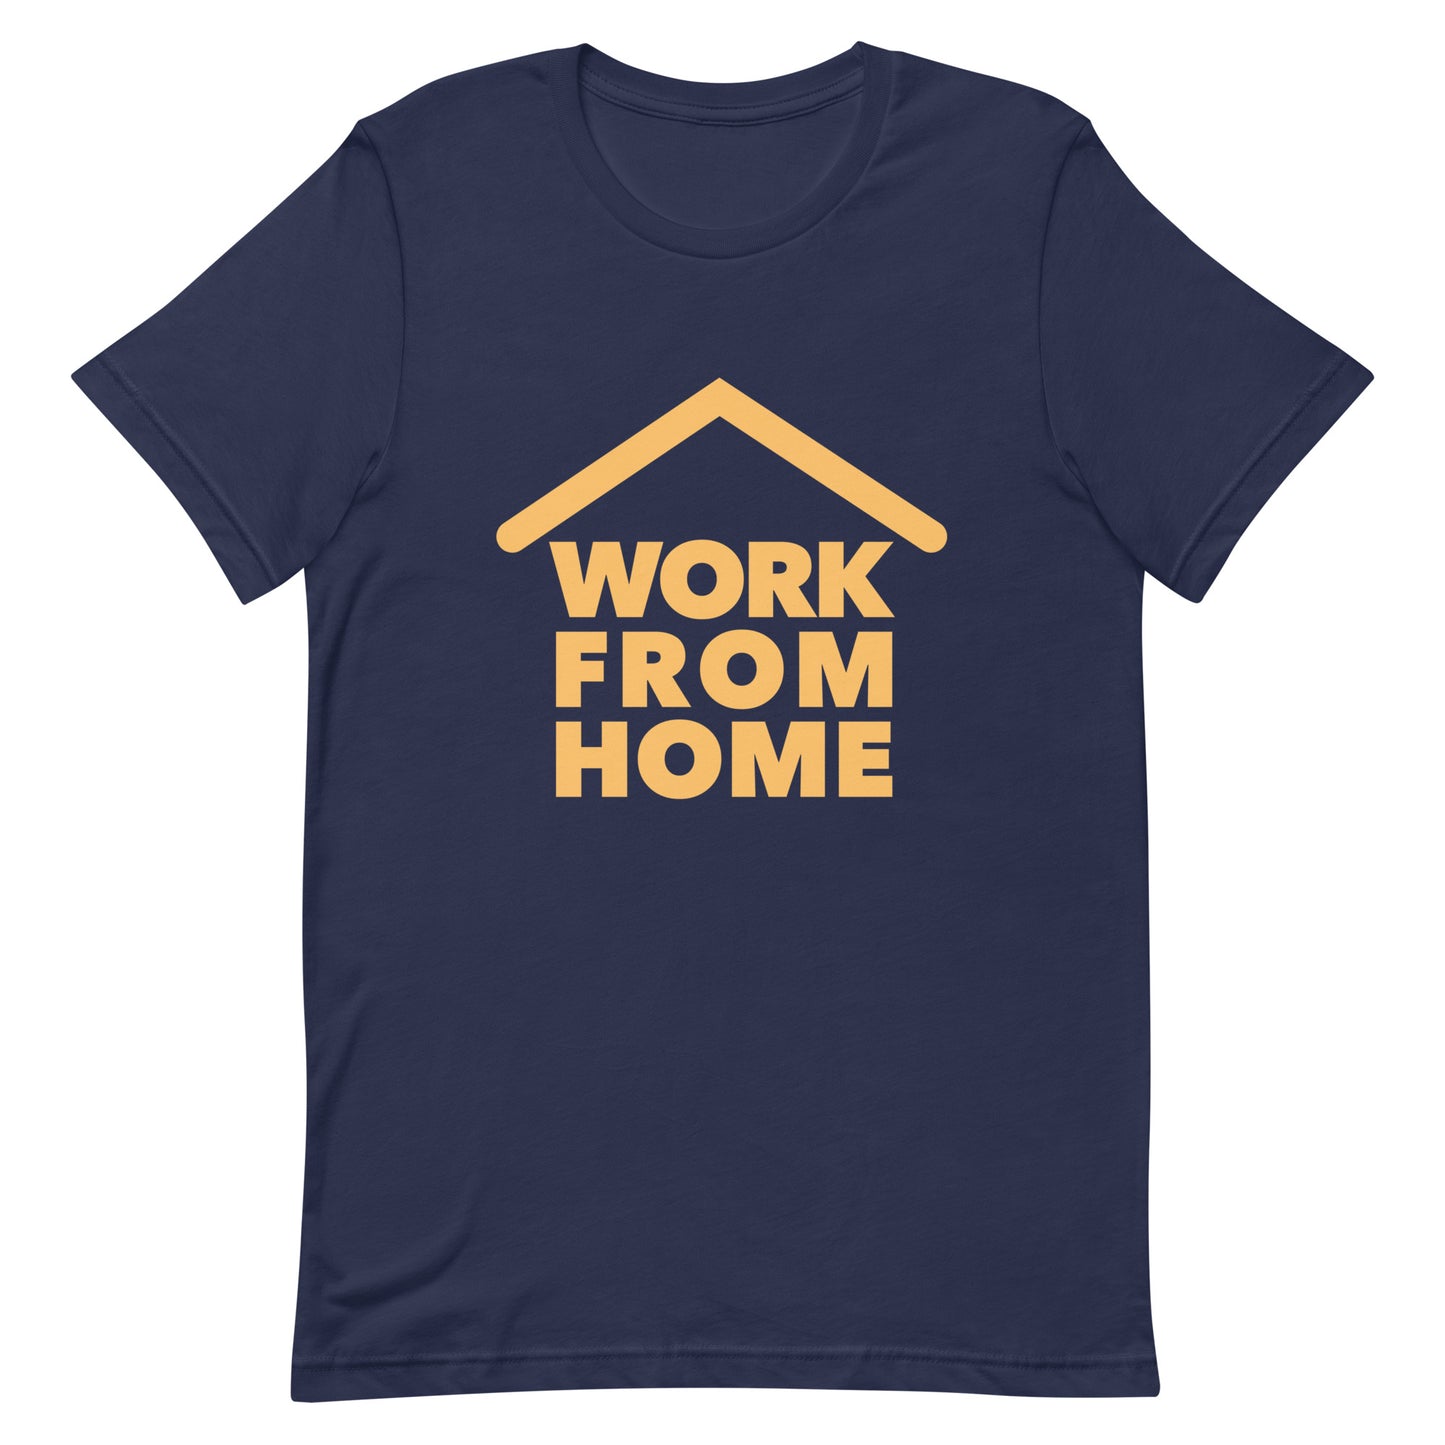 Work from Home - Sustainably Made Men's Short Sleeve Tee